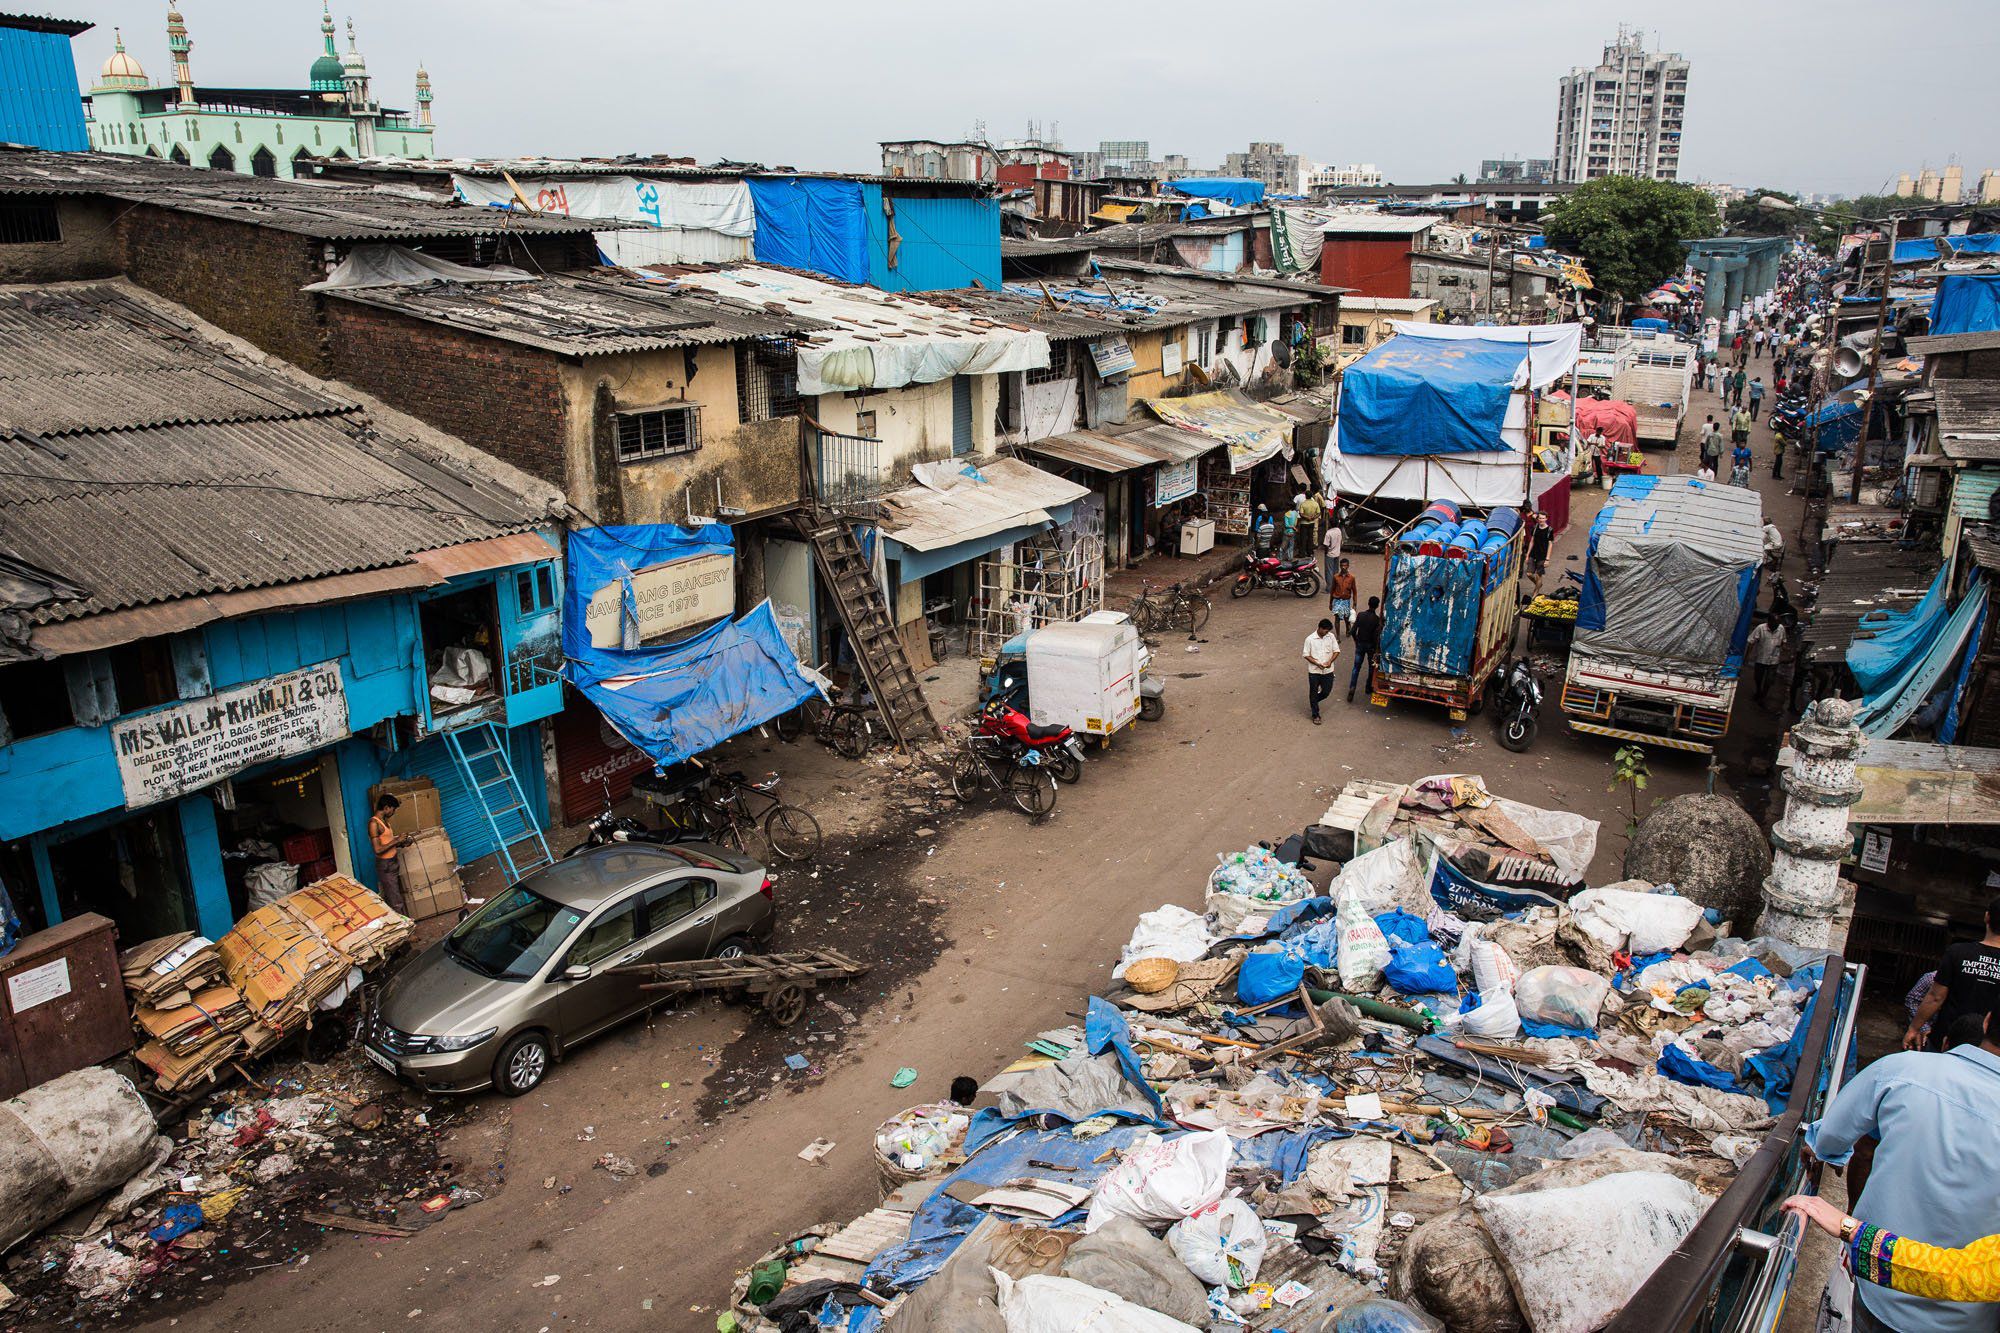 Dharavi busy street